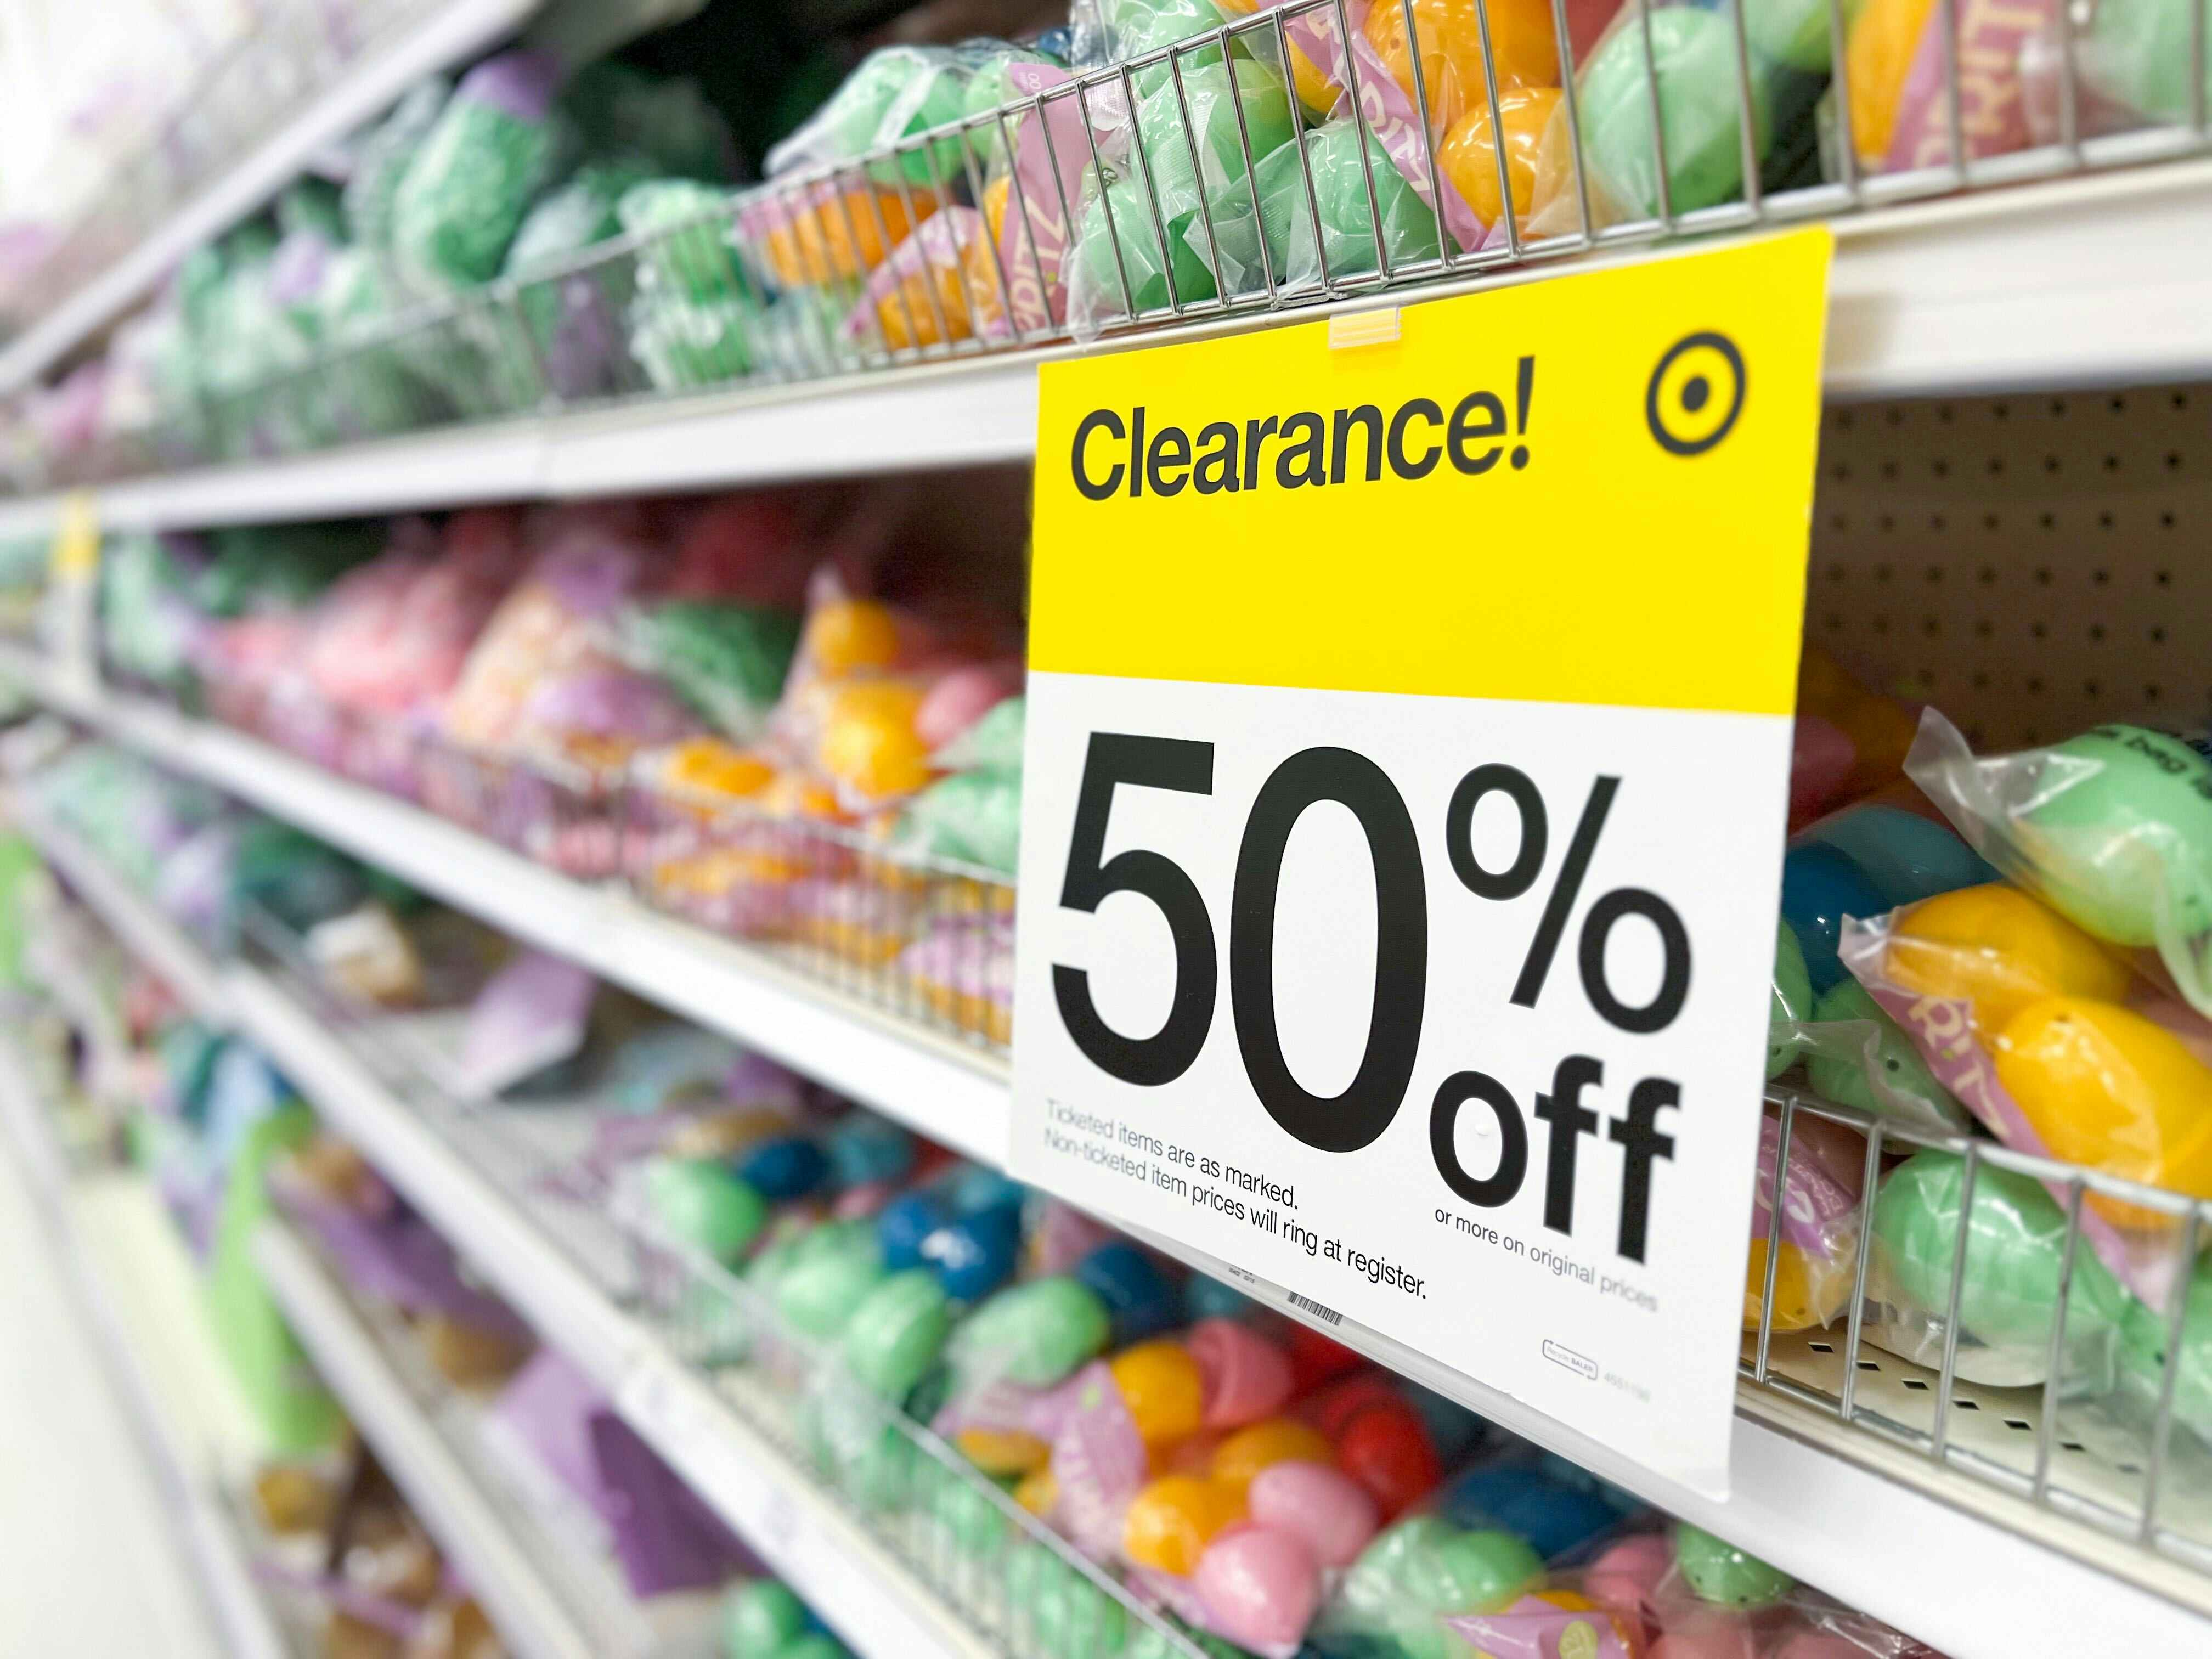 Don't Miss The Clearance Toys on Sale at Barnes & Noble! Up to 50% Off!! -  Passion For Savings